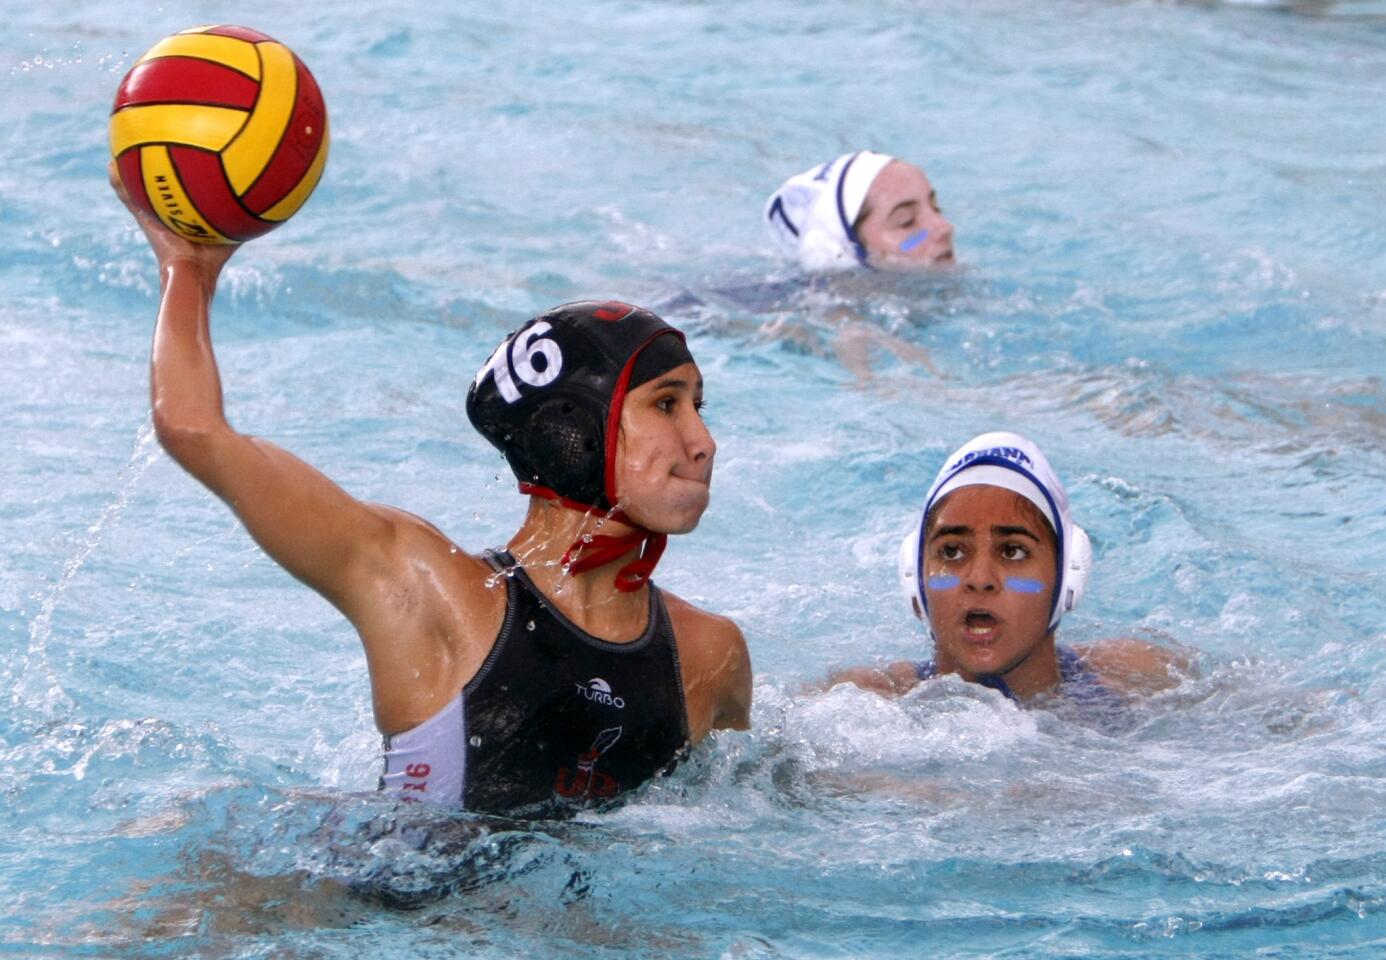 Burroughs High School girls water polo player #16 Aleah Orozco takes a shot on goal in home game vs. Burbank High School, in Burbank on Thursday, Jan. 12, 2017. Burroughs won the game 13-3.